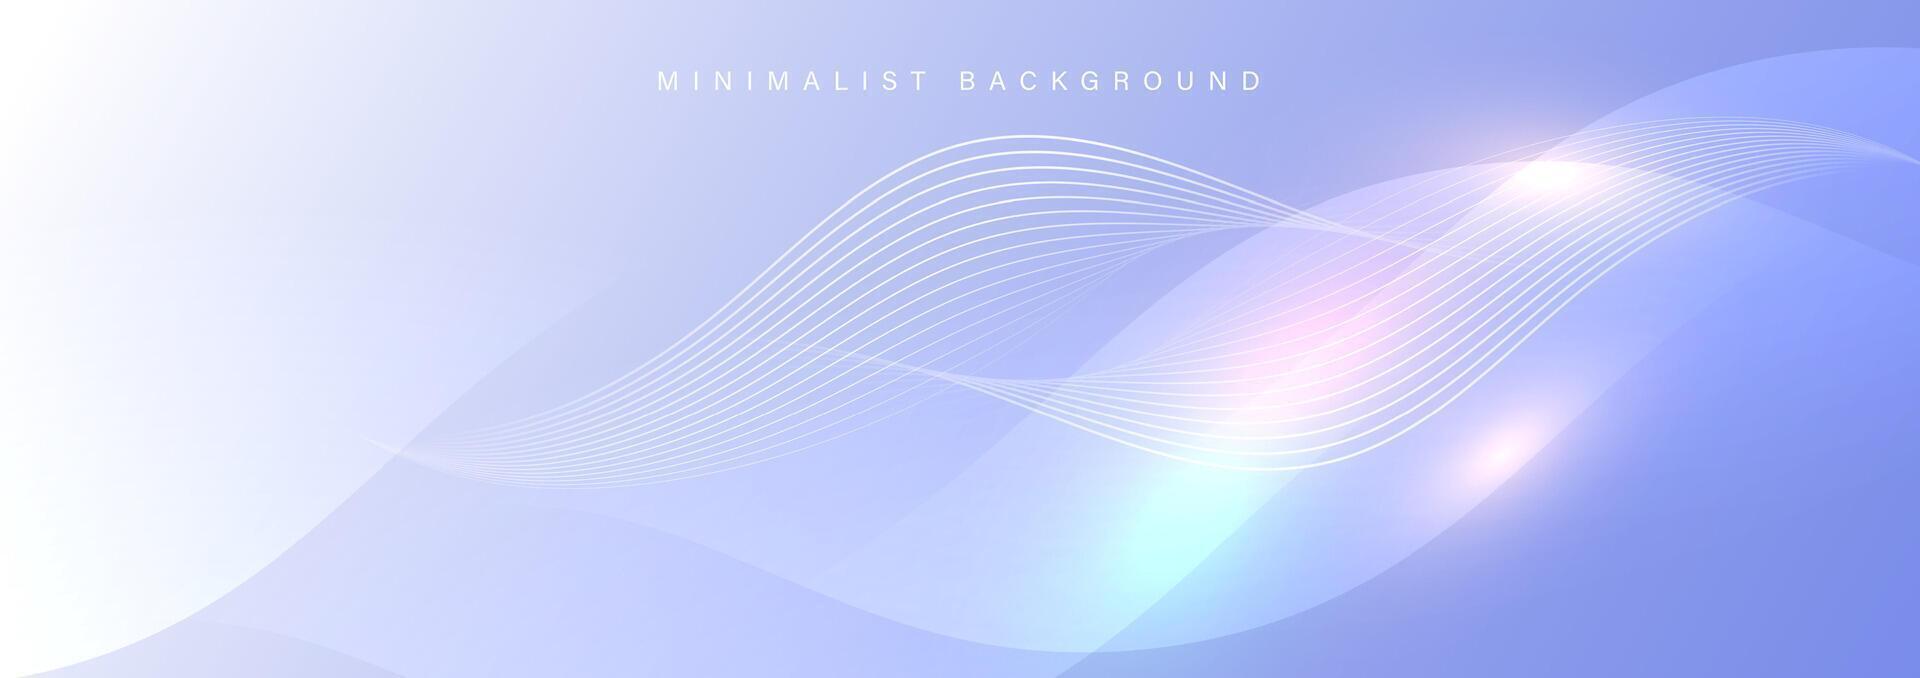 Abstract blue background with wavy and curvy lines vector